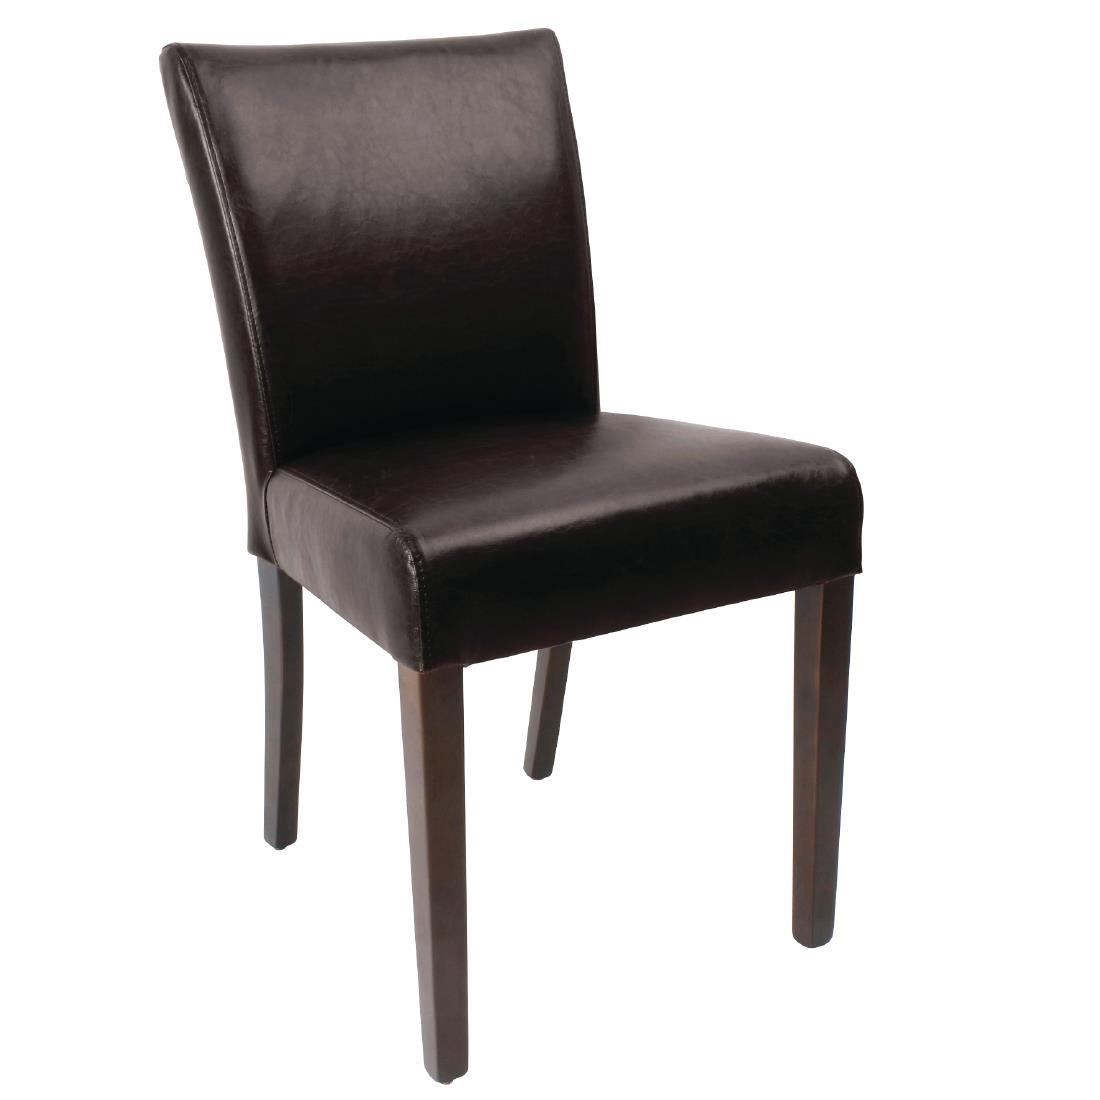 Contemporary Dining Chair - Dark Brown